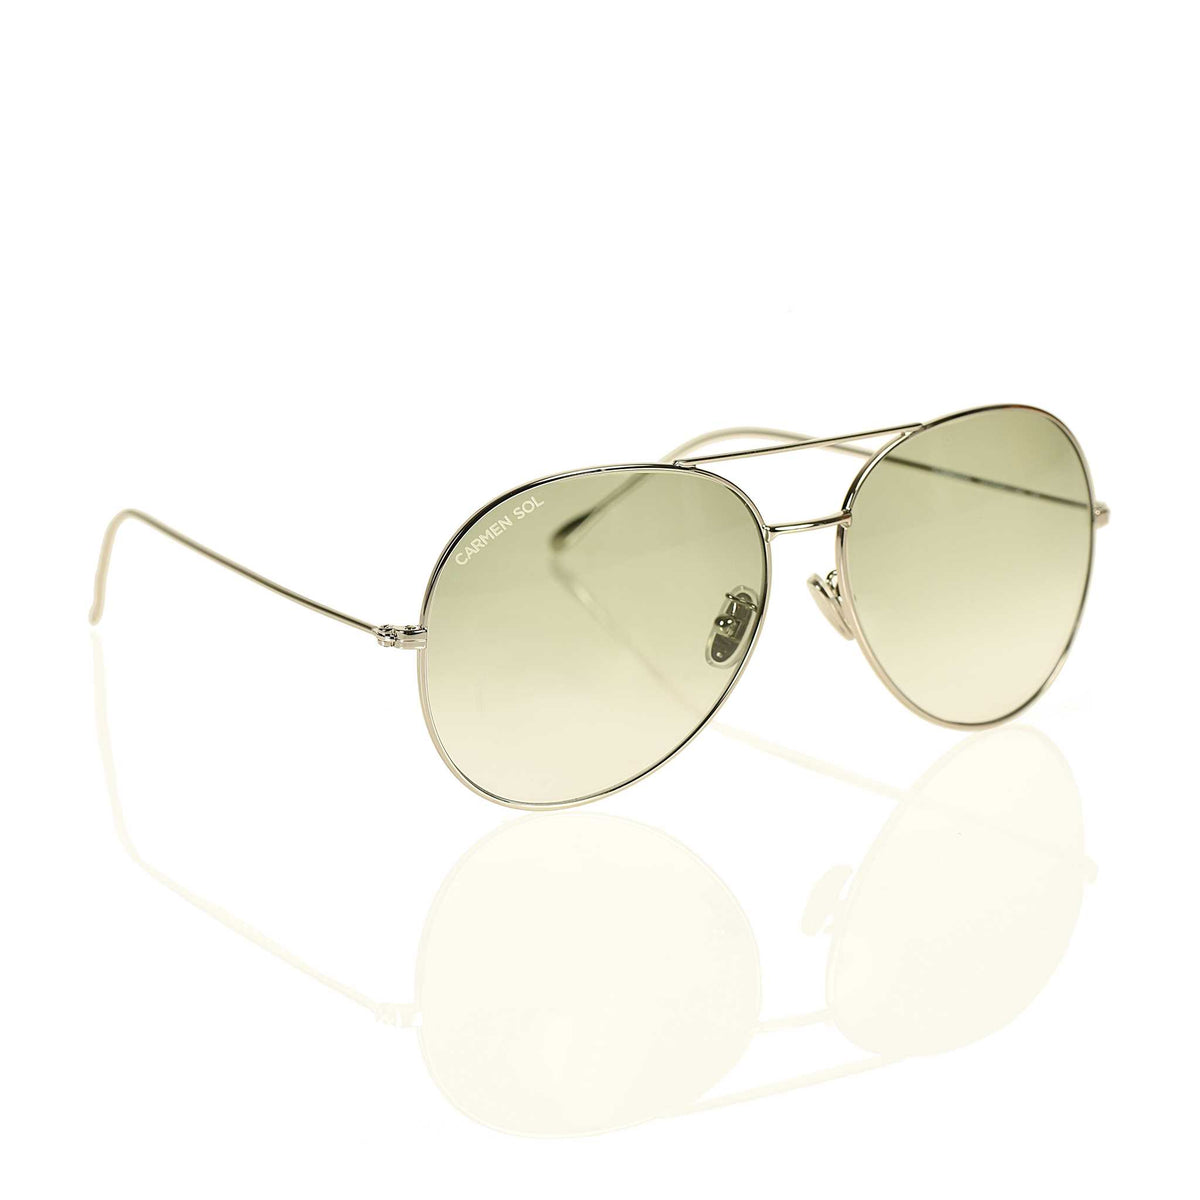 Olive green lenses in a gold aviator sunglasses for men and women